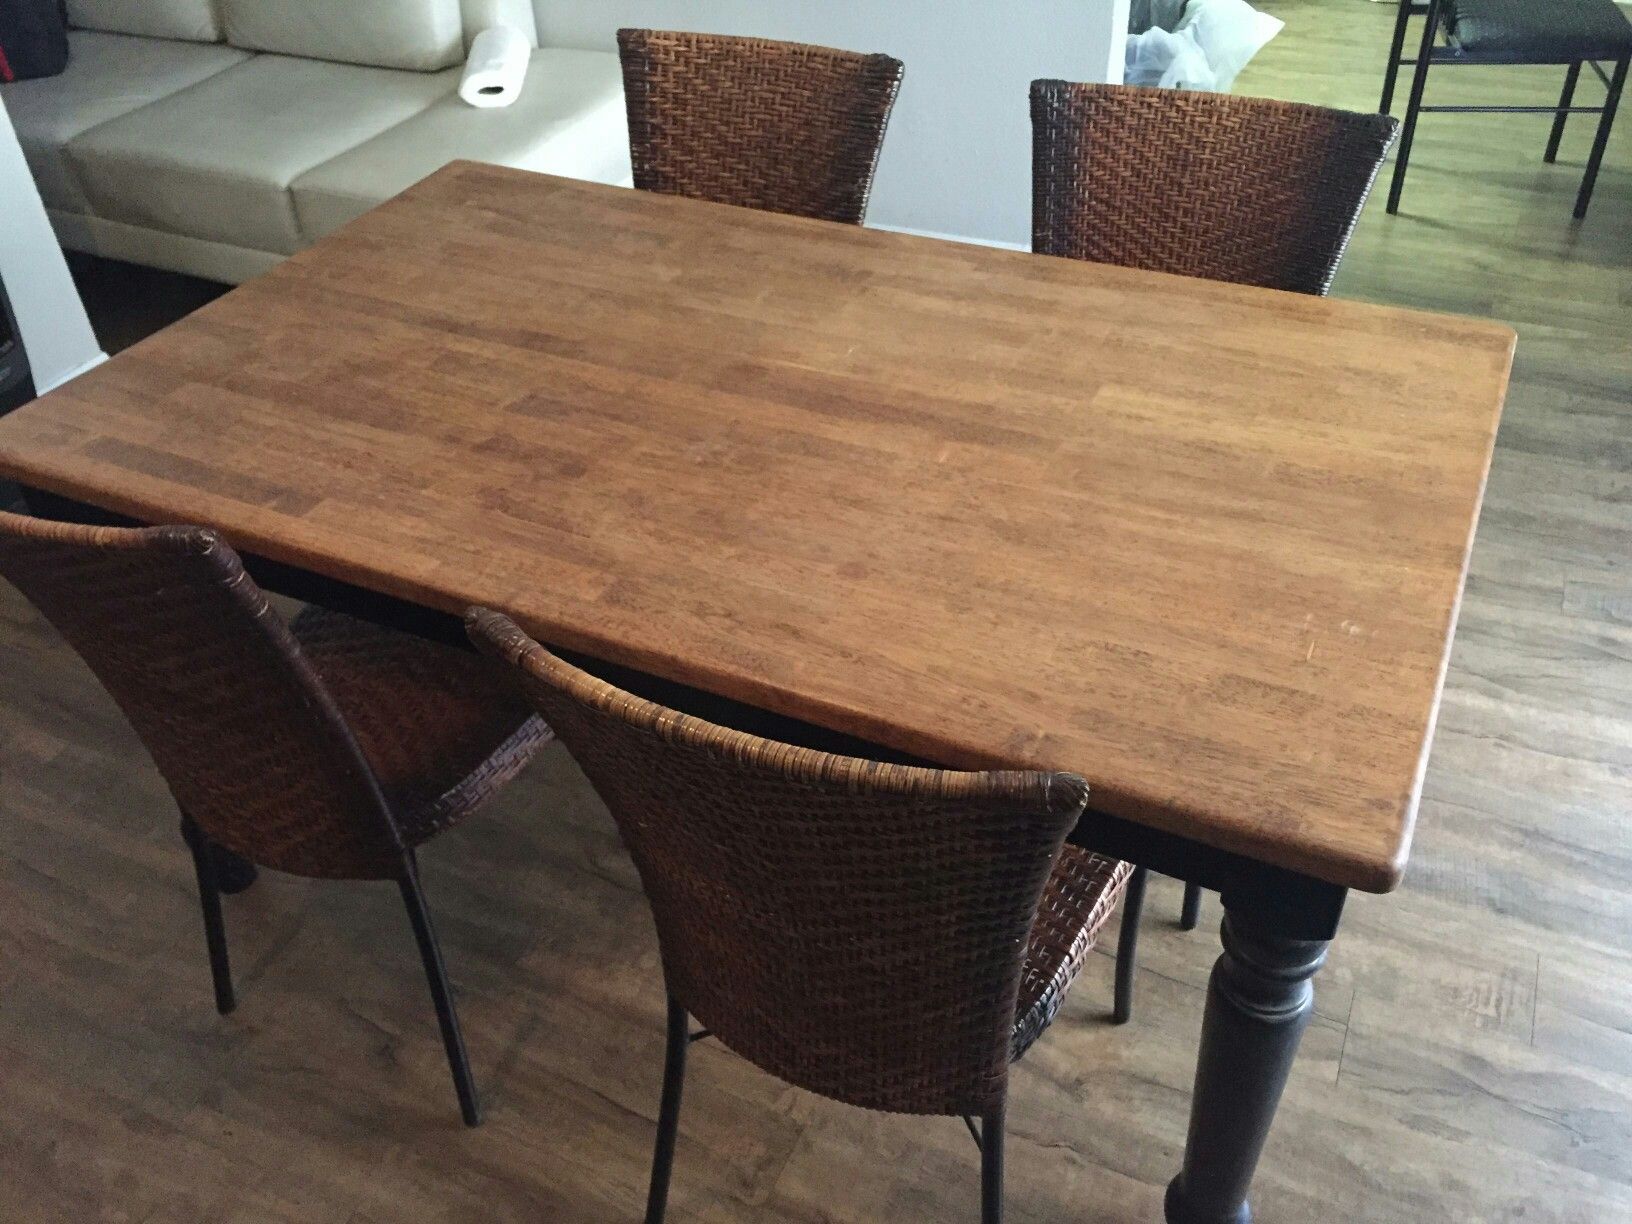 Full Wood Table & Wicker Chairs